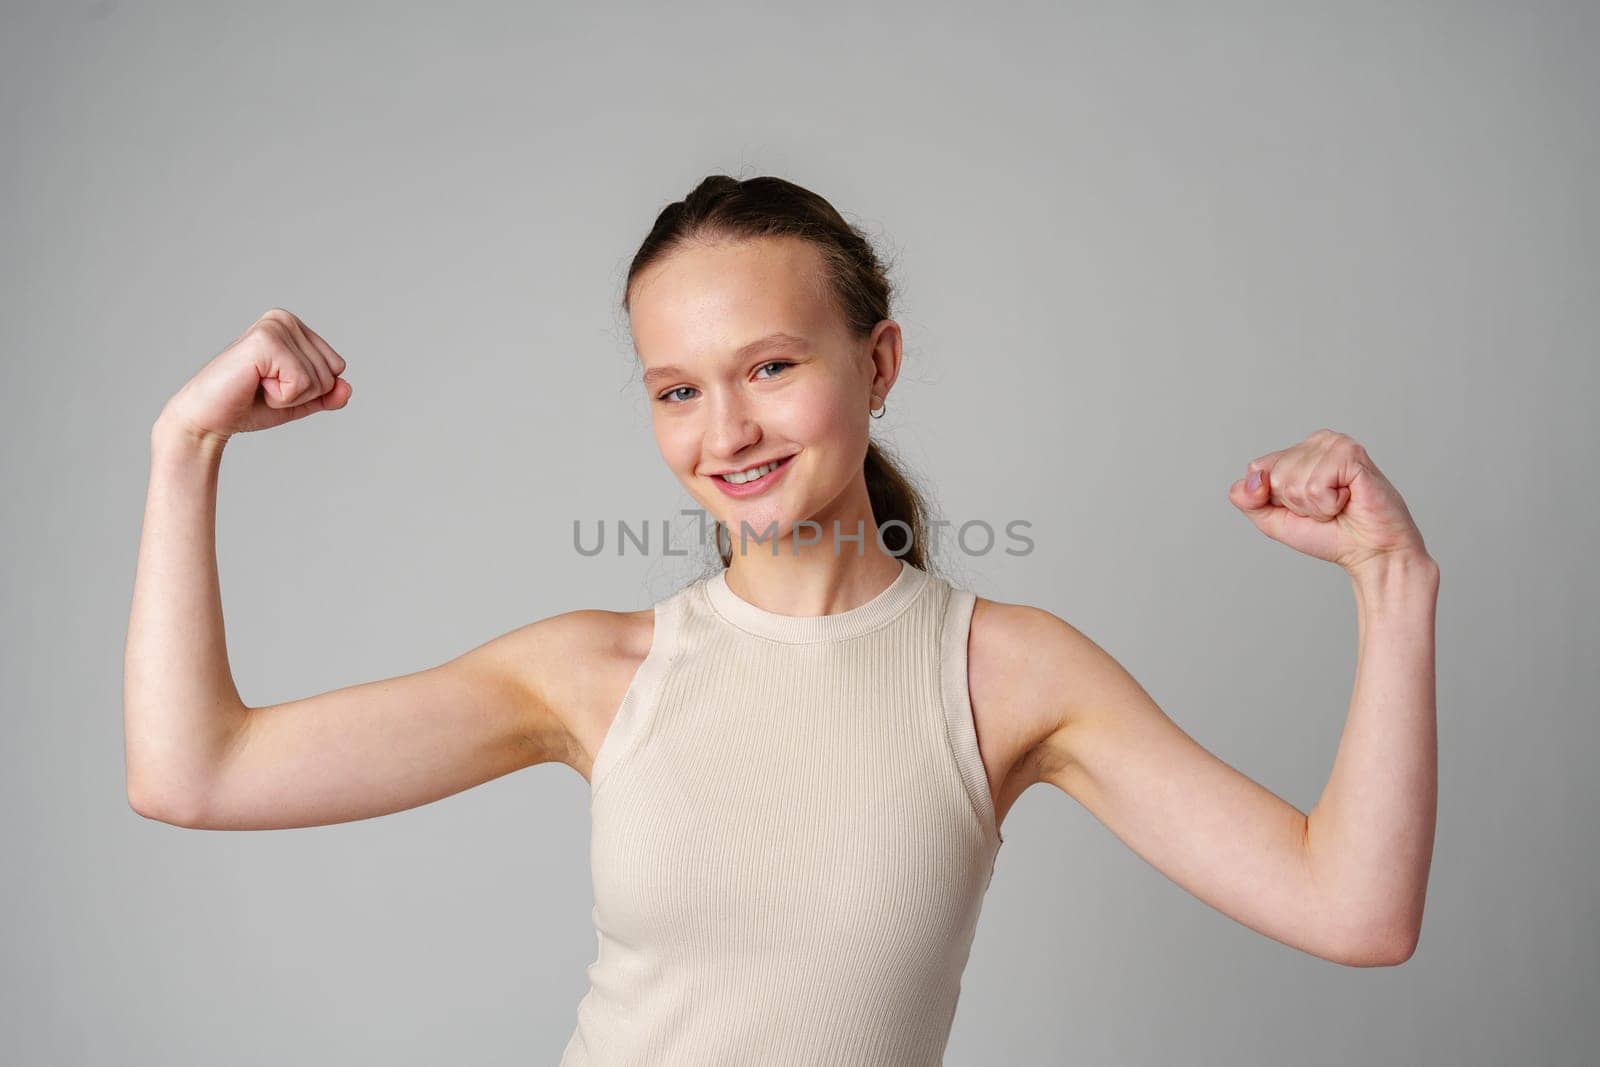 Young Woman Flexing Muscles in Beige Tank Top on gray background by Fabrikasimf